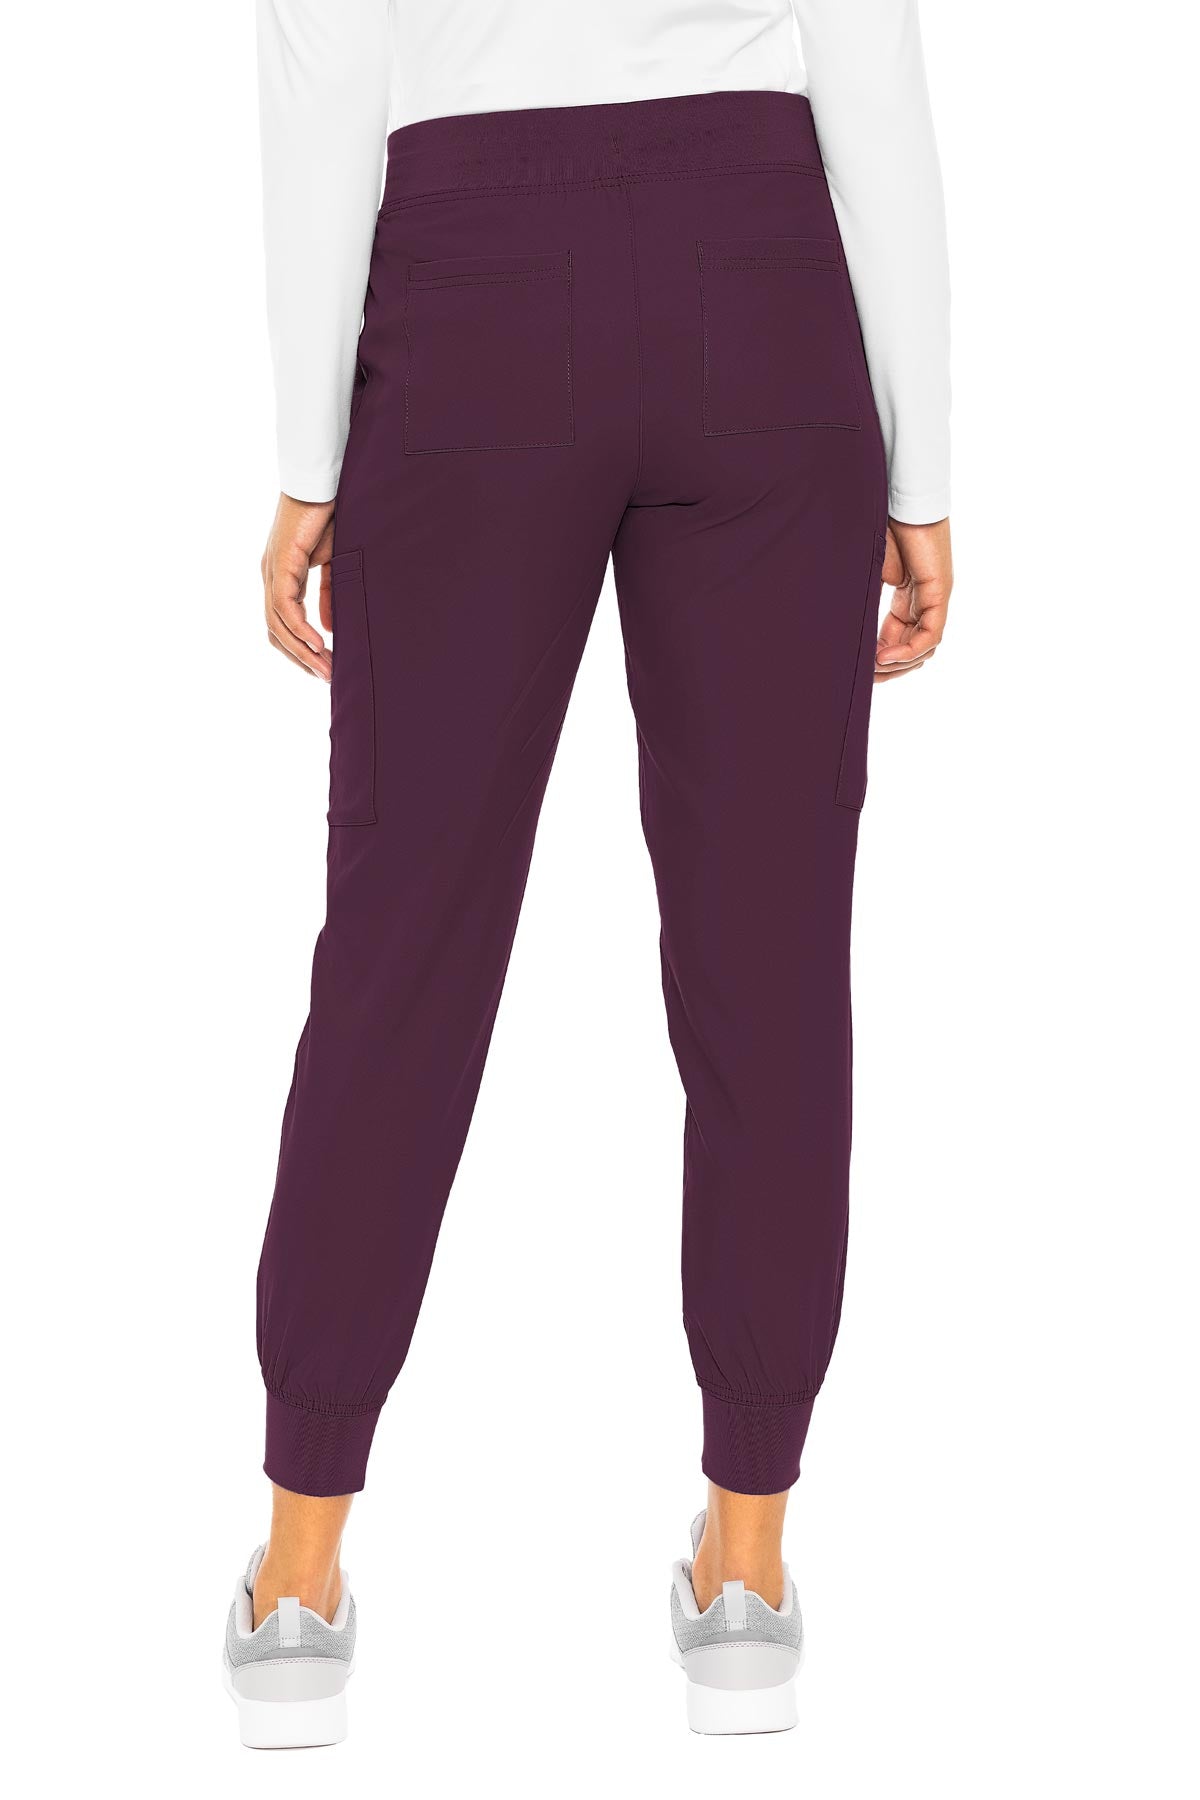 MED COUTURE Jogger Petite/Tall